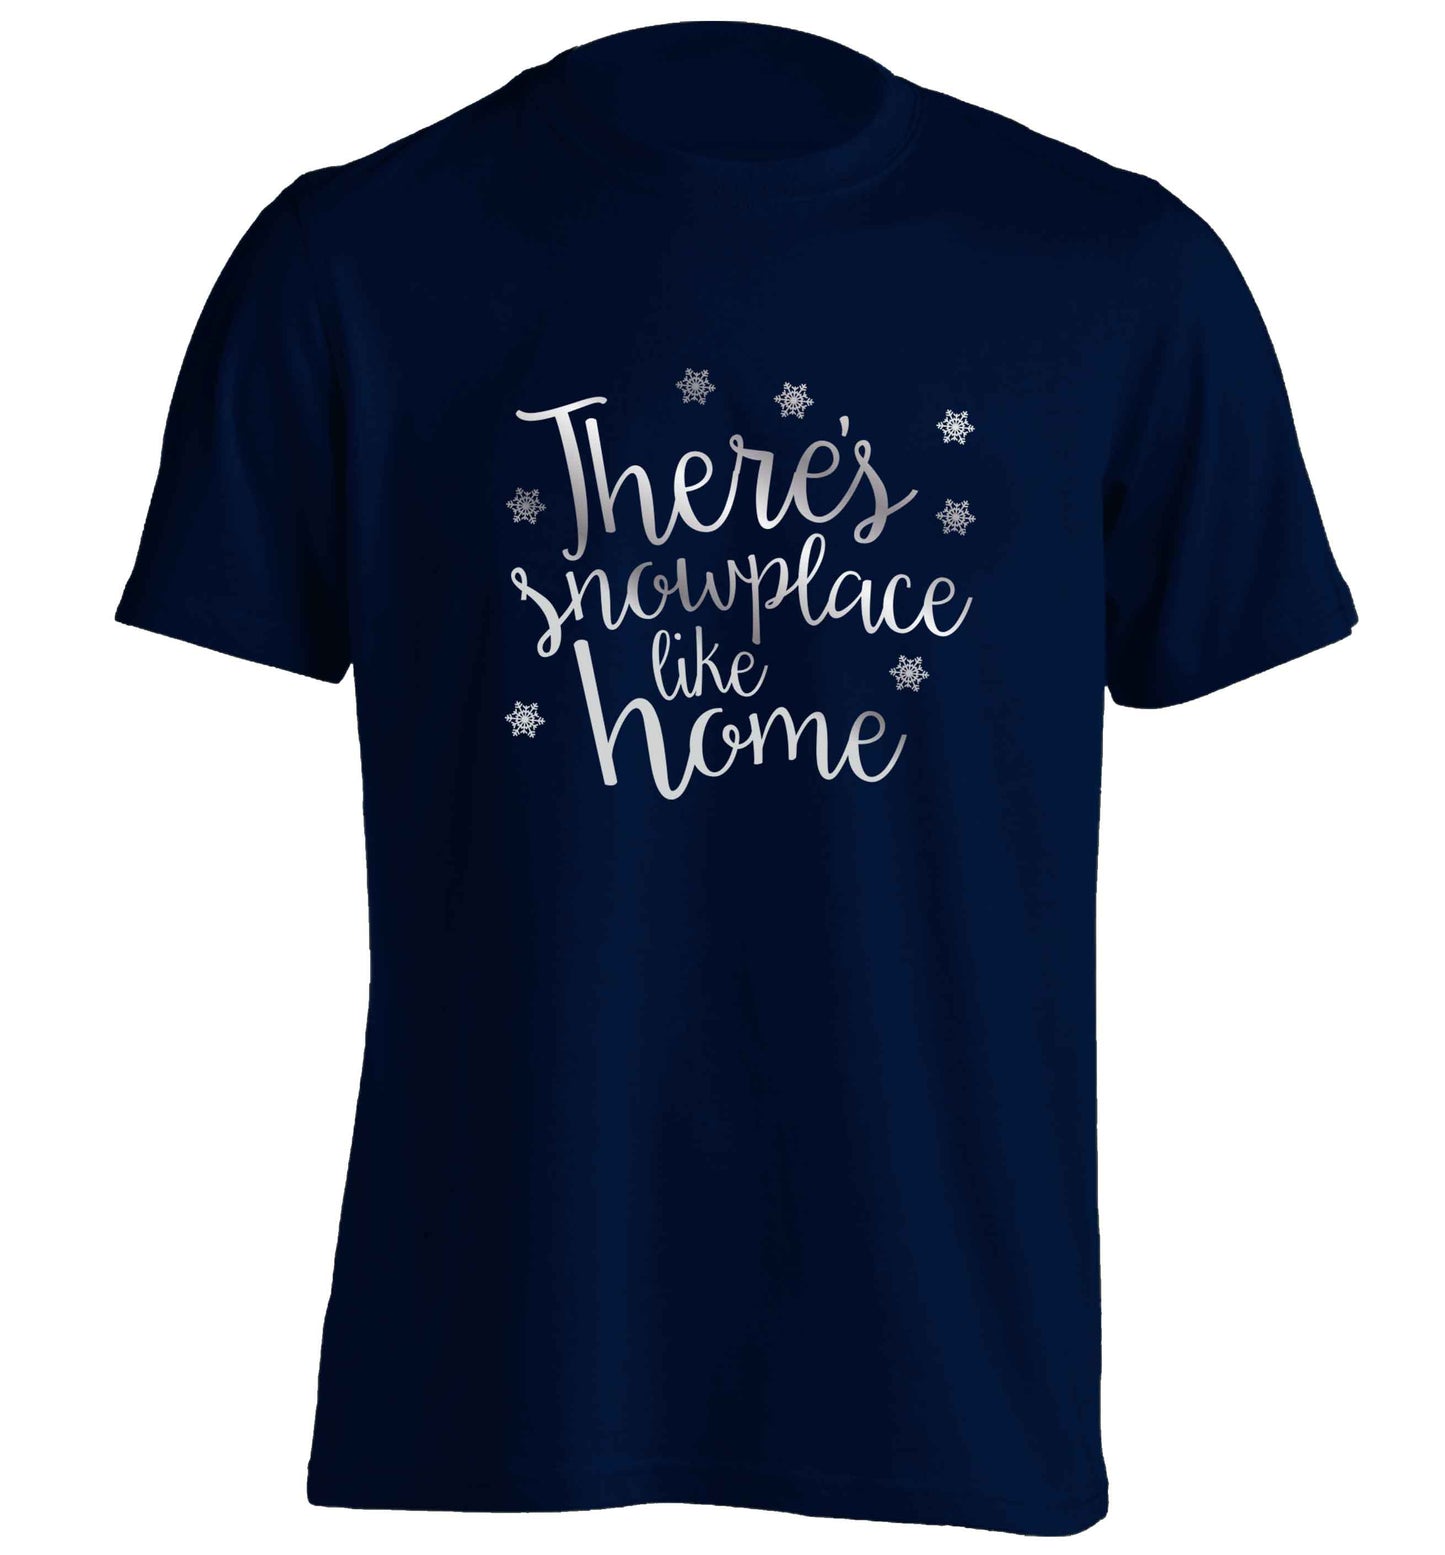 There's snowplace like home - metallic silver adults unisex navy Tshirt 2XL